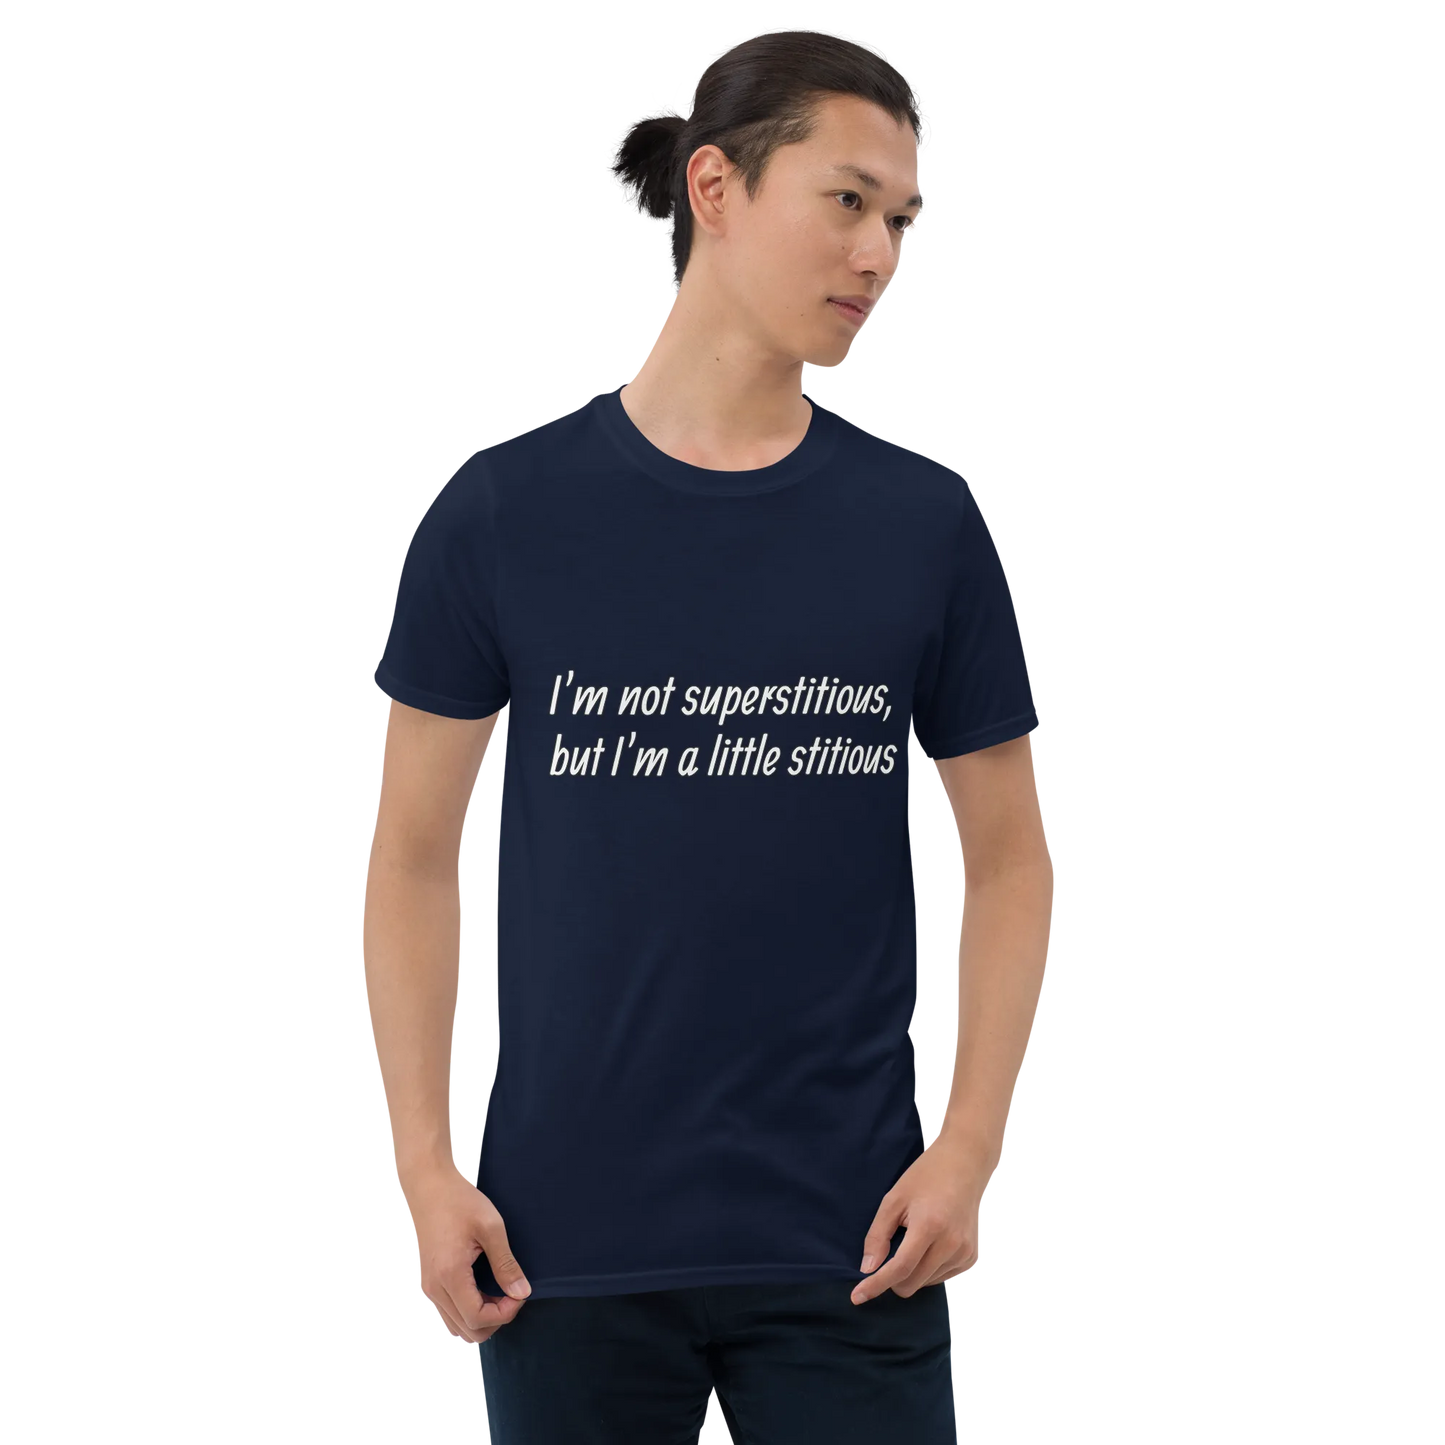 I'm a Little Stitious Tee in Navy on man